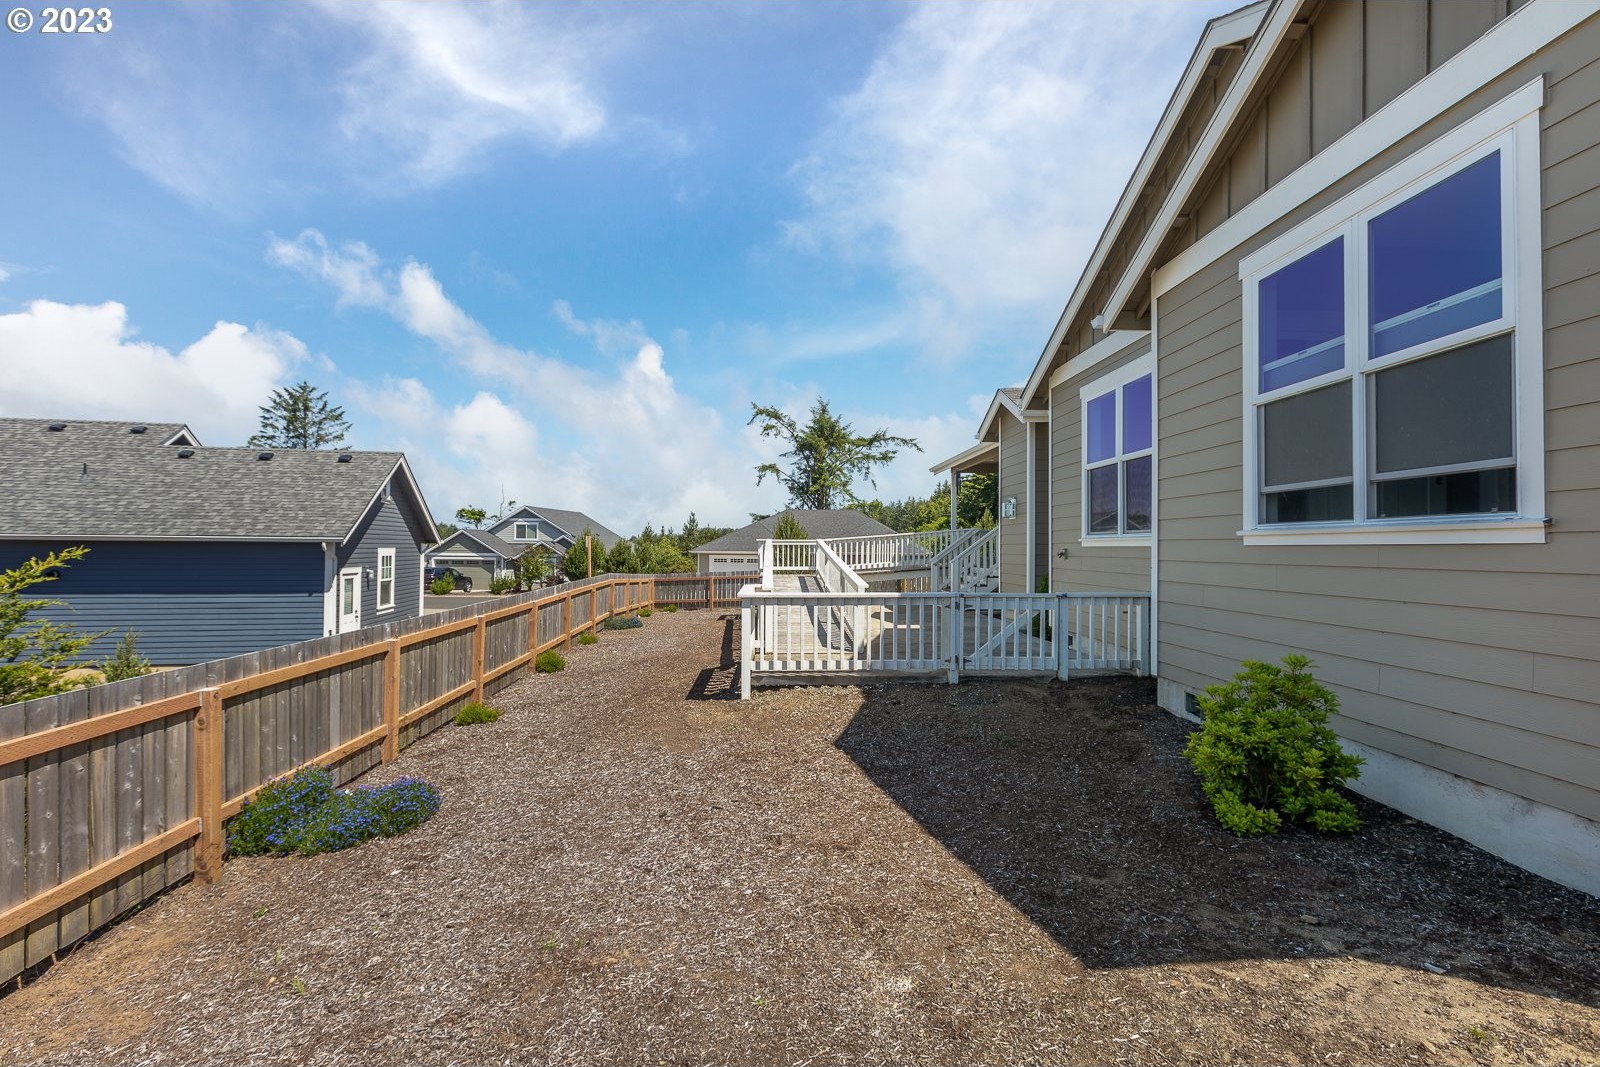 4143 SE JETTY AVE, Lincoln City, Oregon, 97367, United States, 3 Bedrooms Bedrooms, ,2 BathroomsBathrooms,Residential,For Sale,4143 SE JETTY AVE,1444791